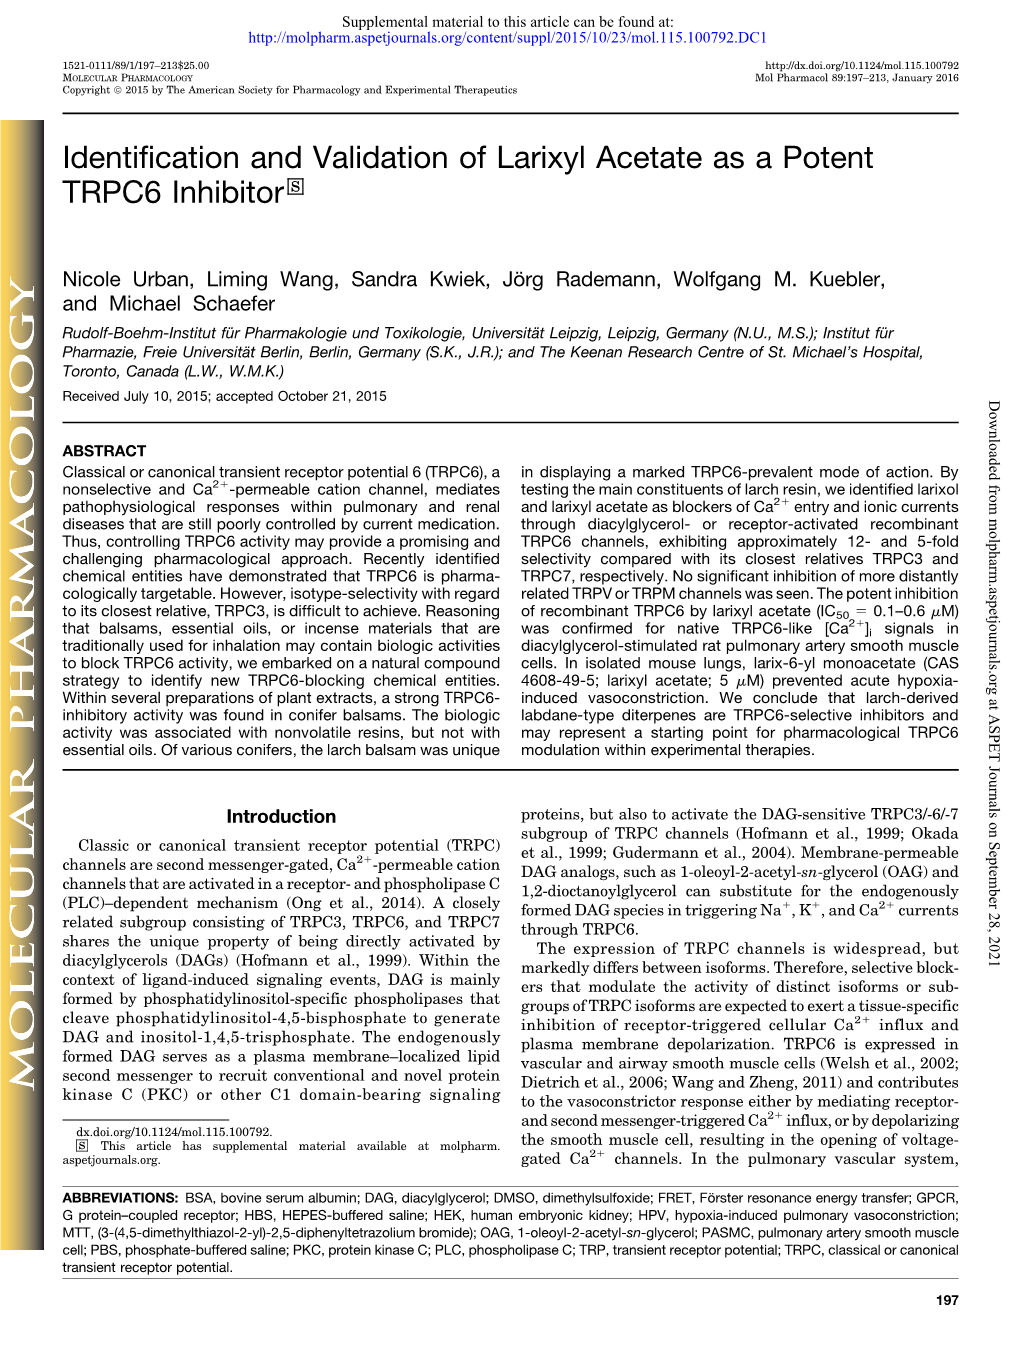 Identification and Validation of Larixyl Acetate As a Potent TRPC6 Inhibitor S